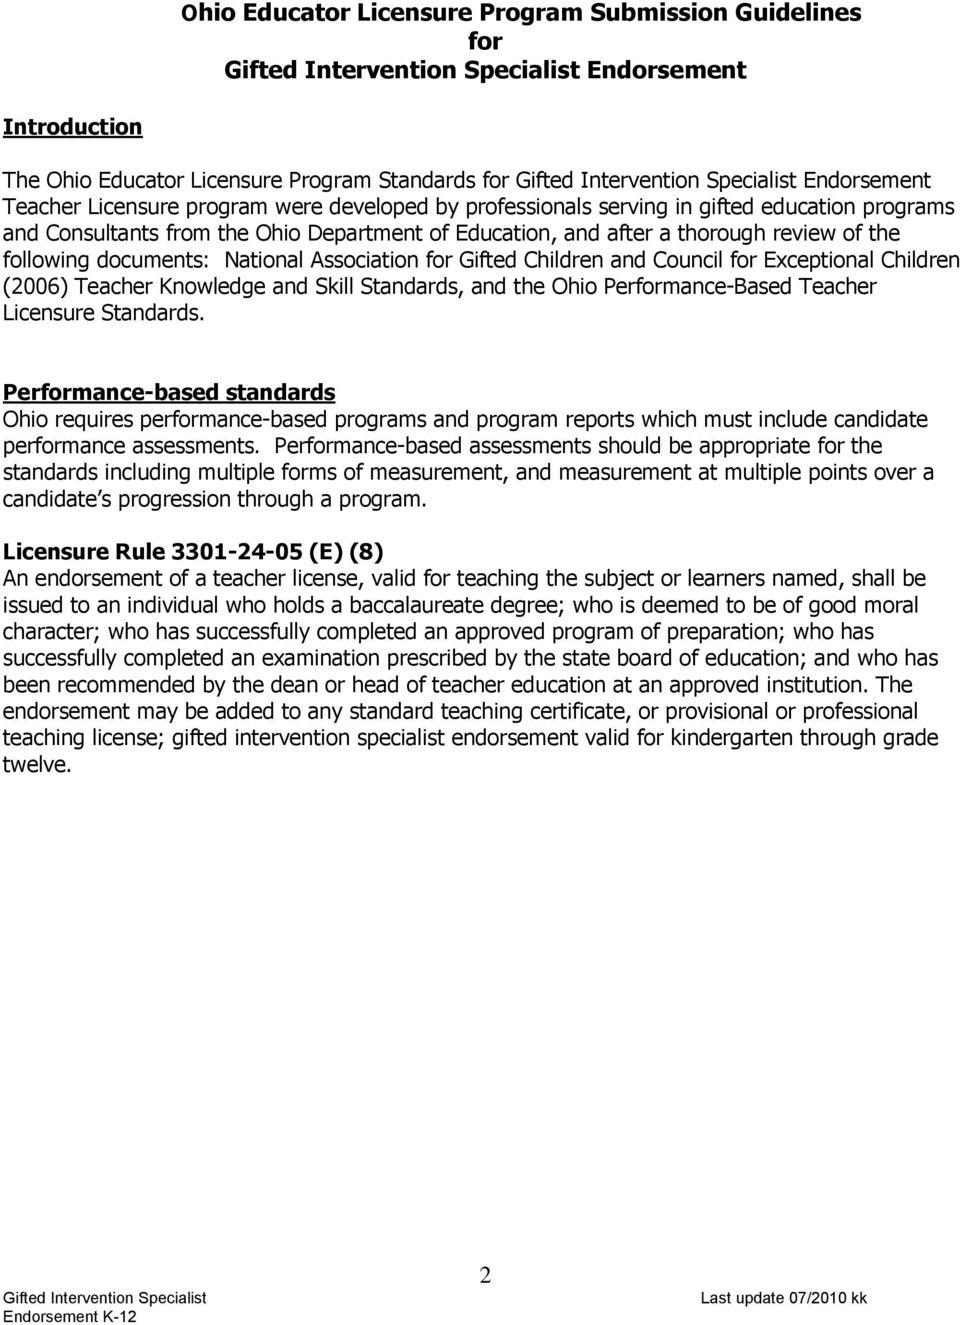 Children and Council for Exceptional Children (2006) Teacher Knowledge and Skill Standards, and the Ohio Performance-Based Teacher Licensure Standards.